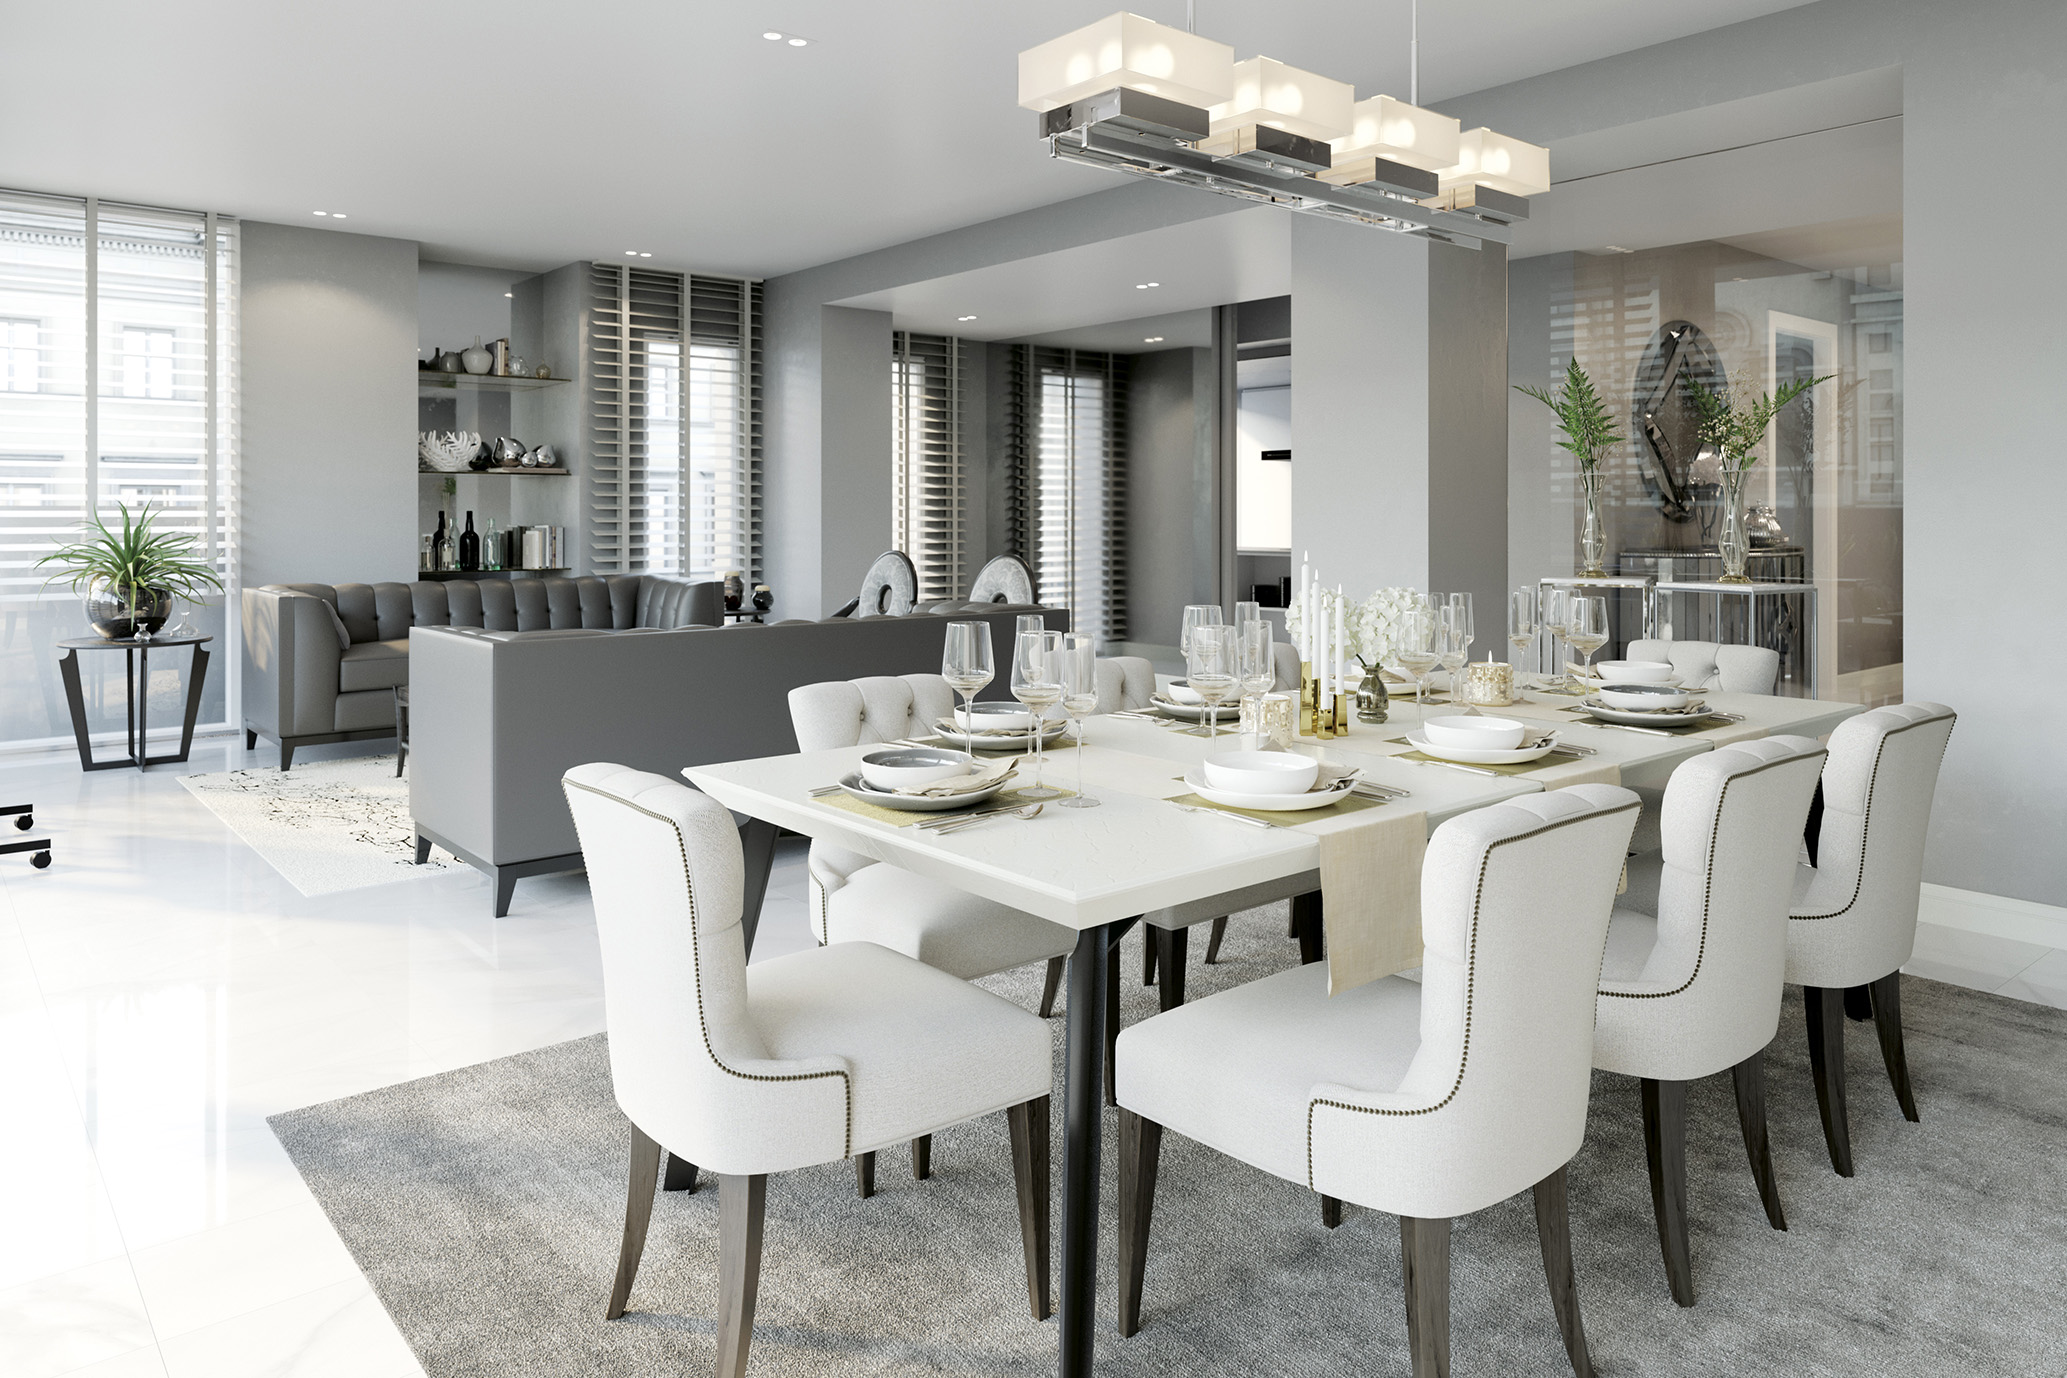 Luxury Dining Room Sets, Luxury Round Table And Chairs